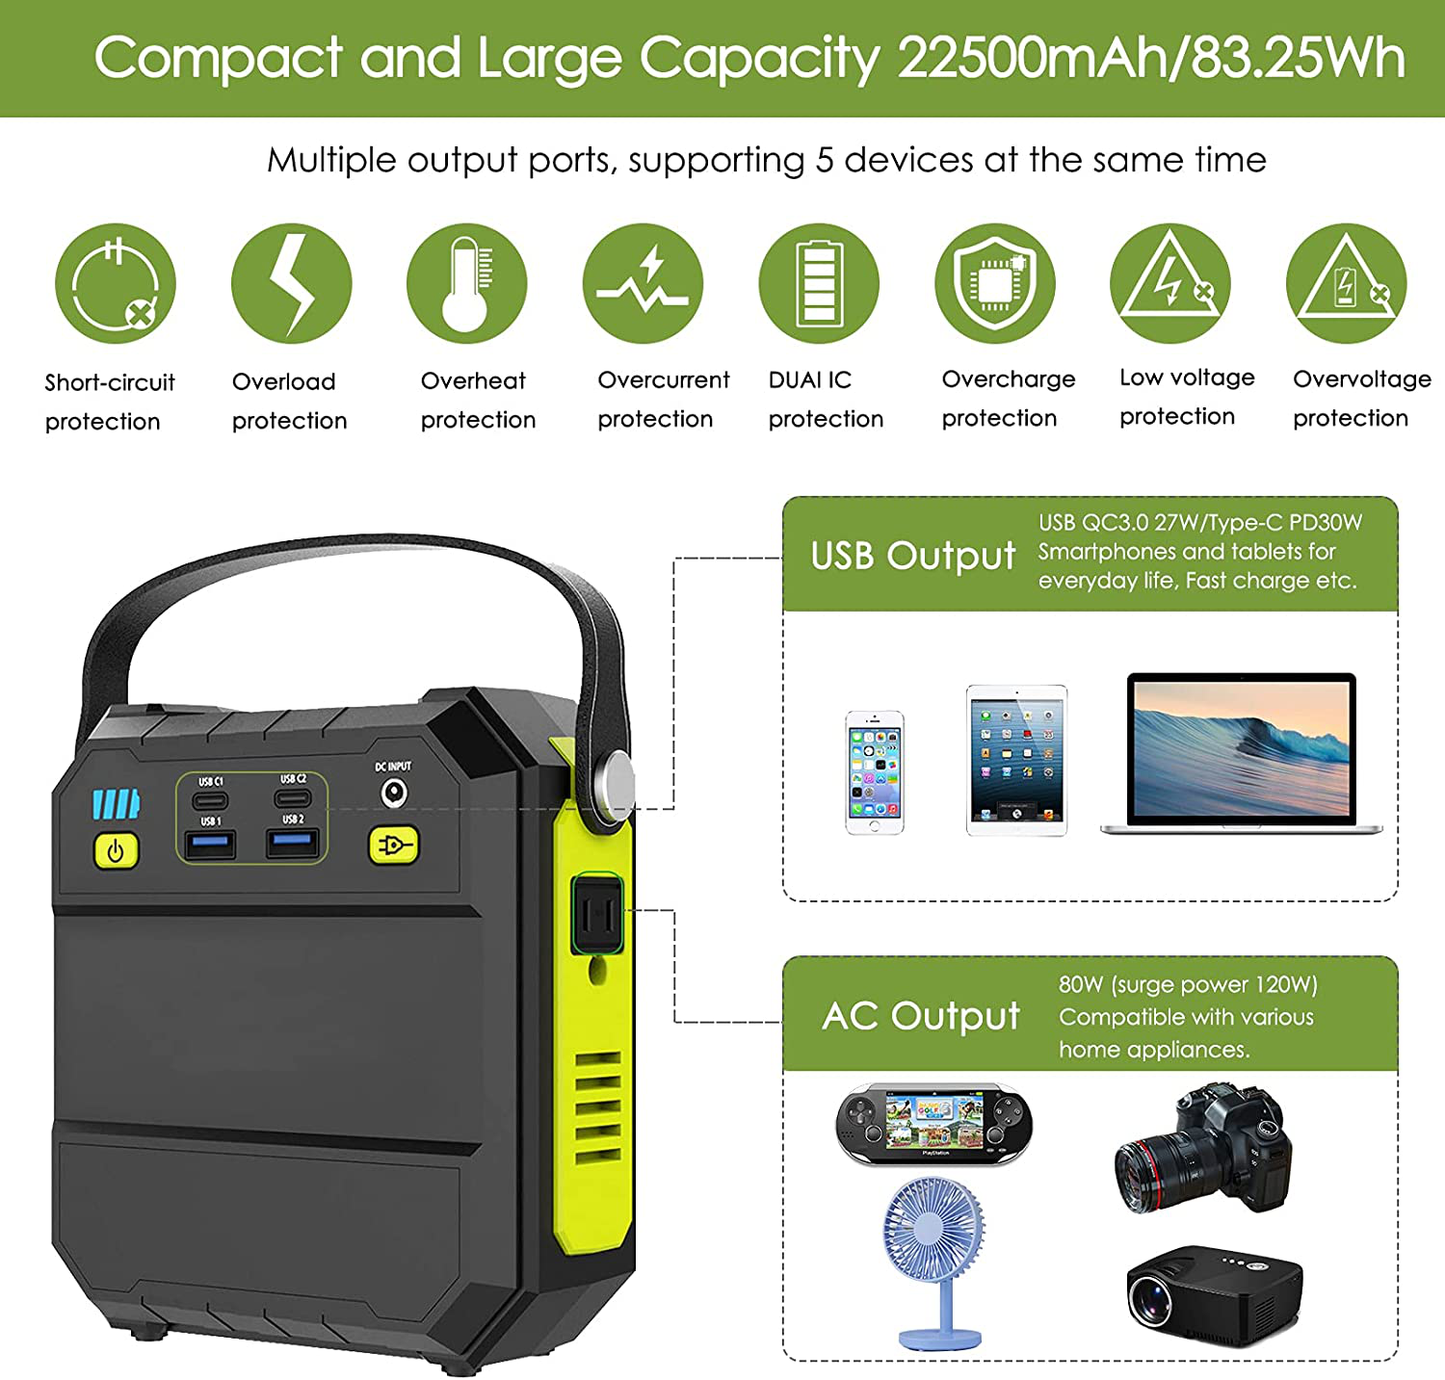 Portable Power Station, 83Wh Solar Generator 22500mAh Camping Lithium Battery Emergency Power Station with AC Outlet 4 USB Ports, Power Supply with Super Bright Flashlight for Camping Outdoor Home